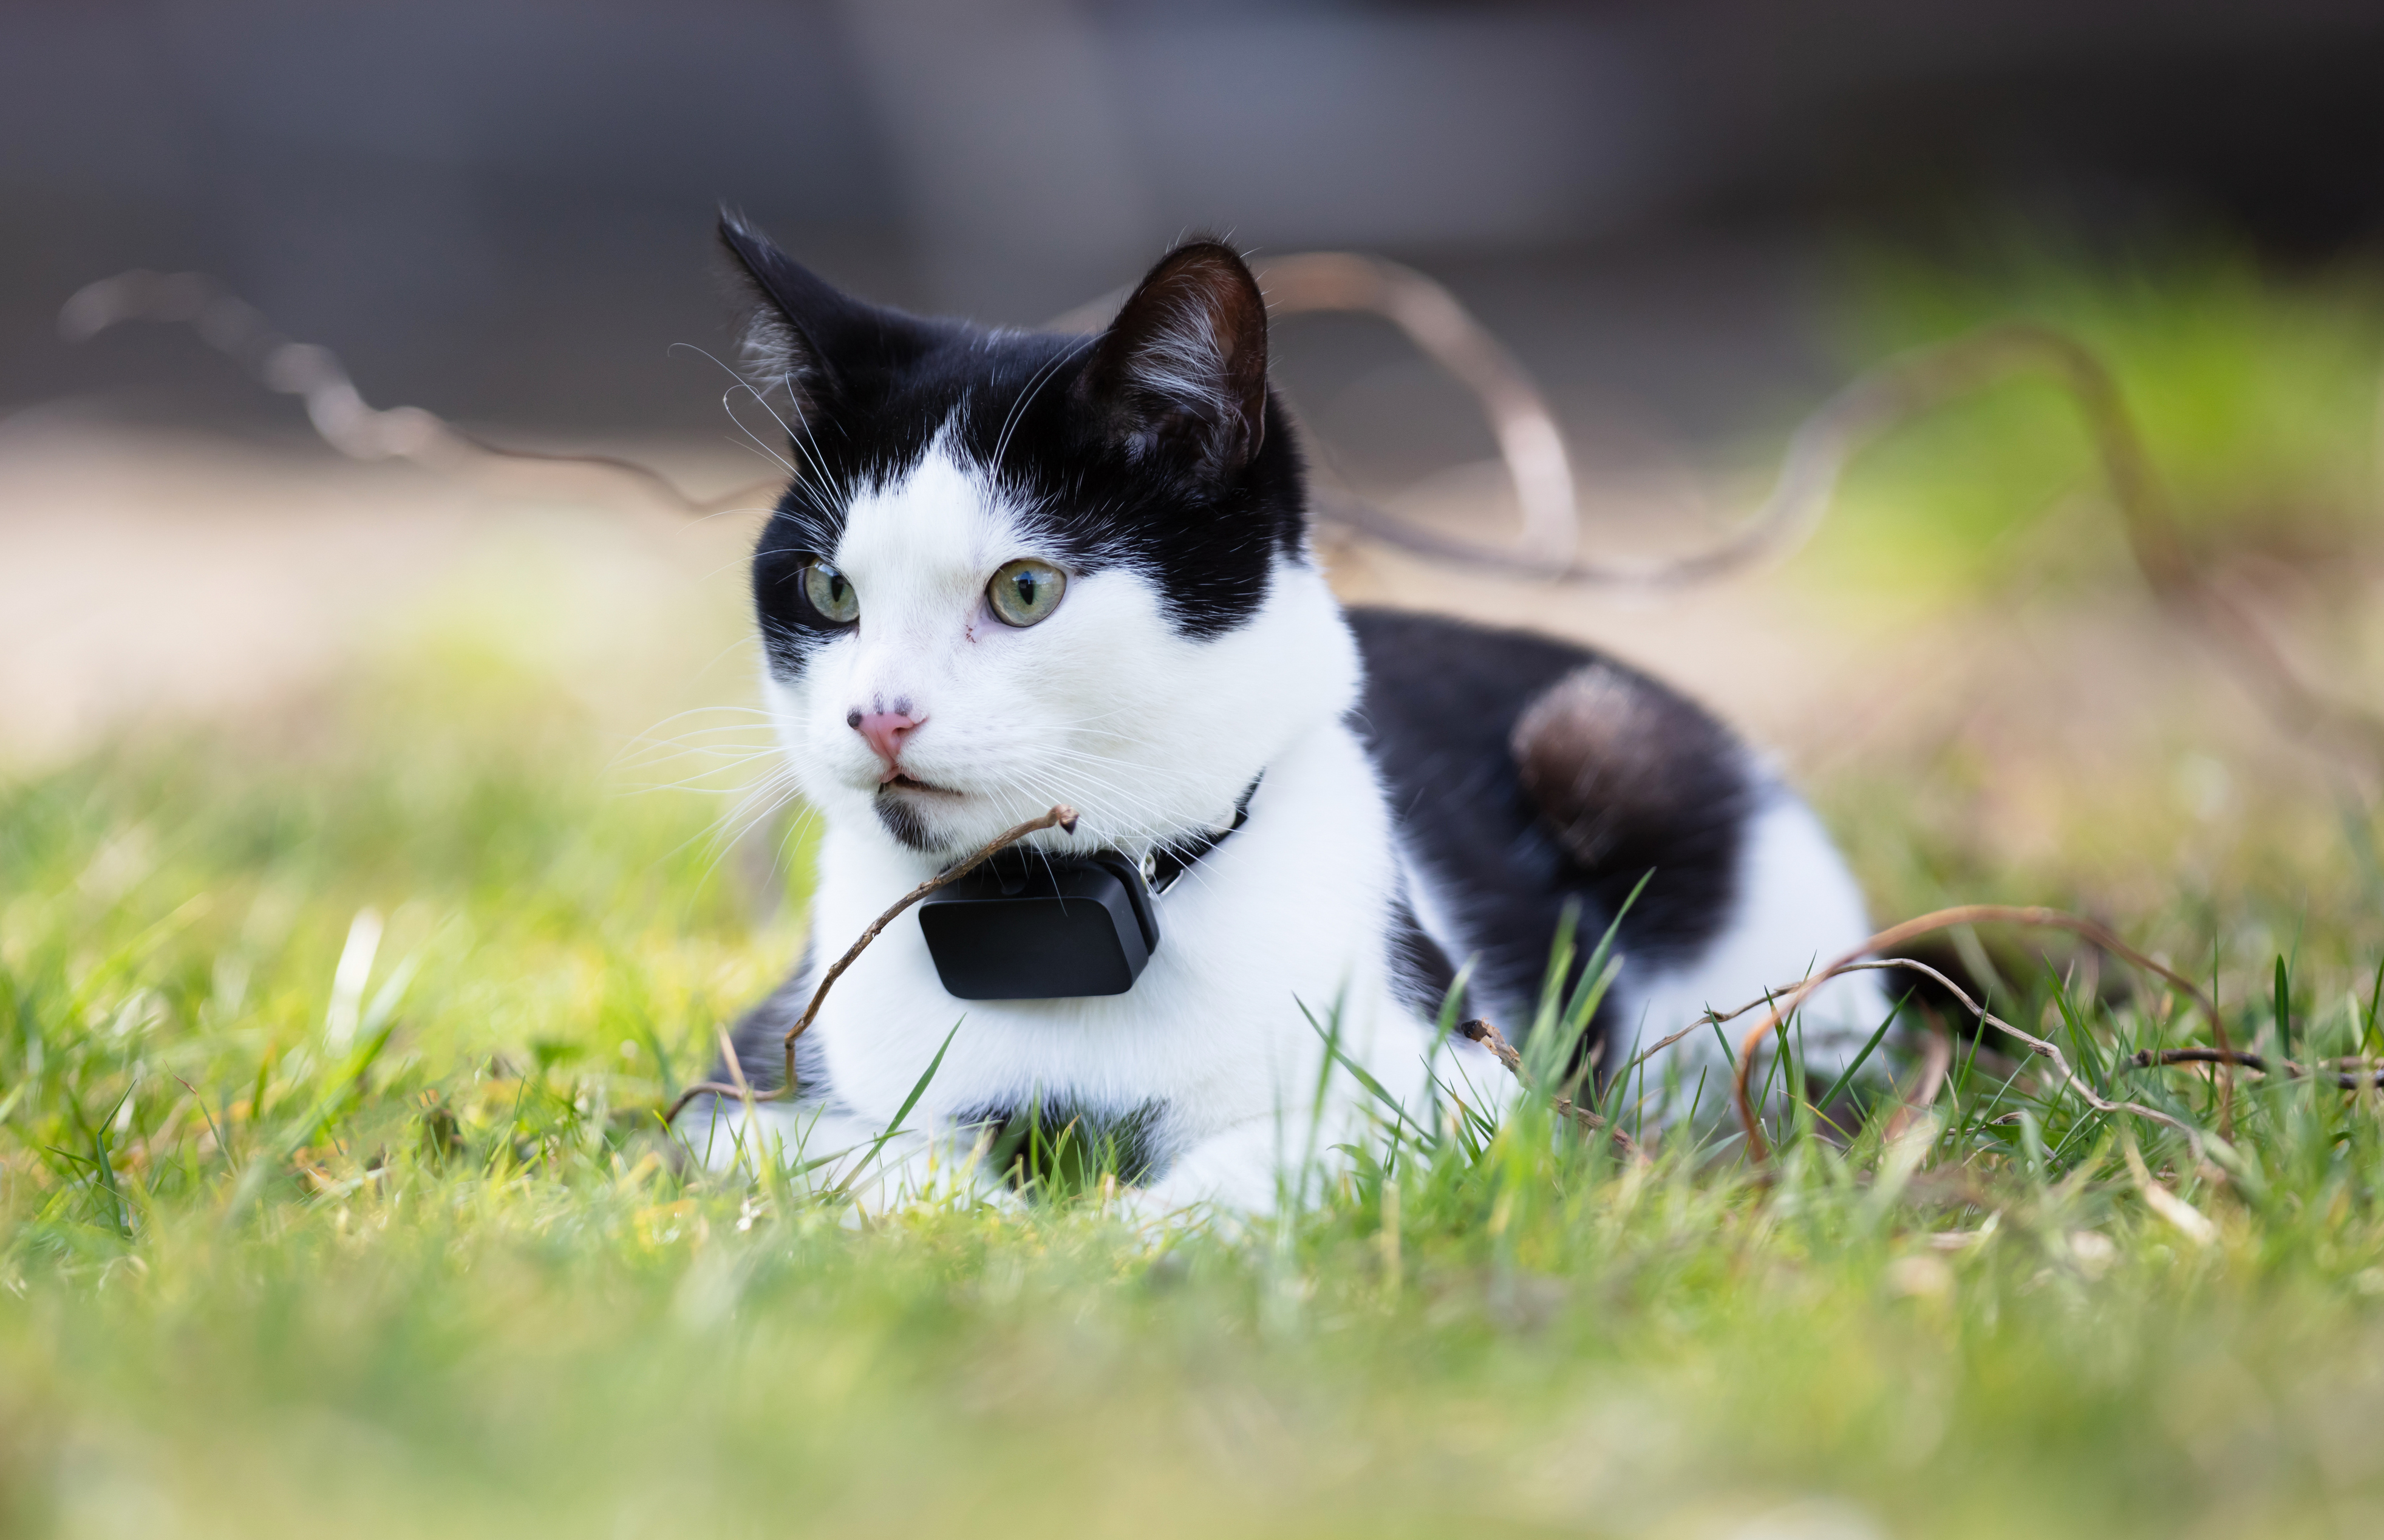 A black and white cat laying in the grass wearing a collar with a GPS tracker or Bluetooth tracking device